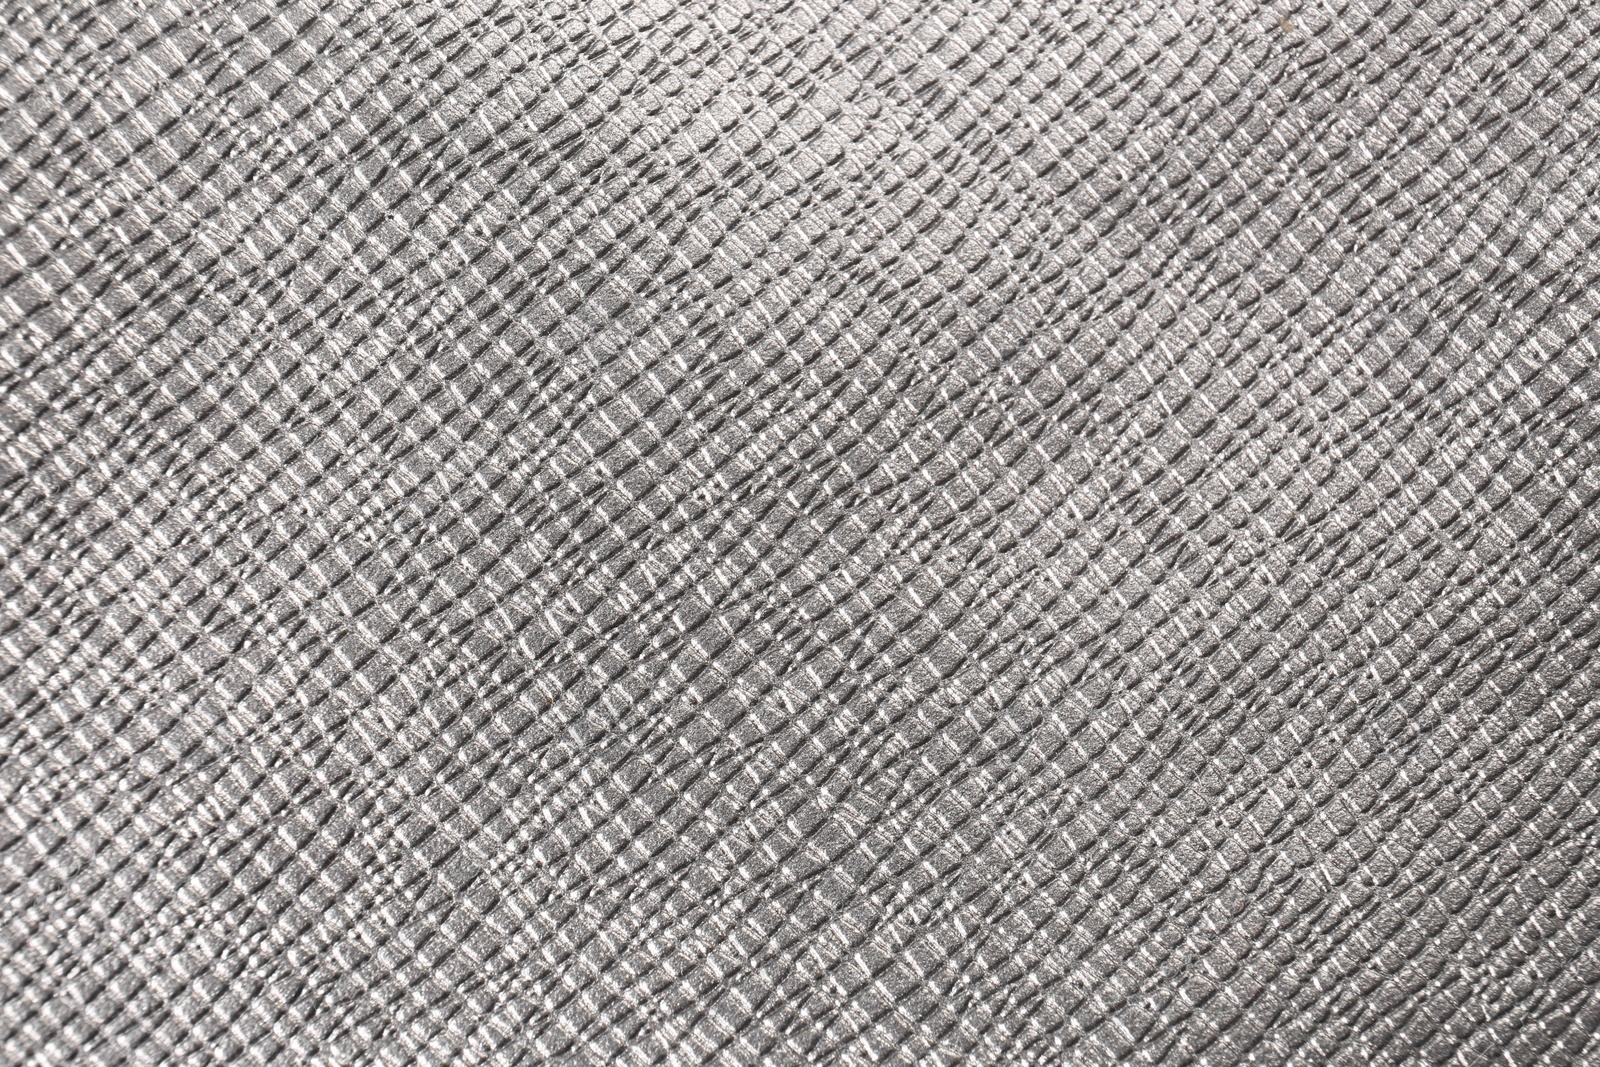 Photo of Closeup view of silver fabric as background